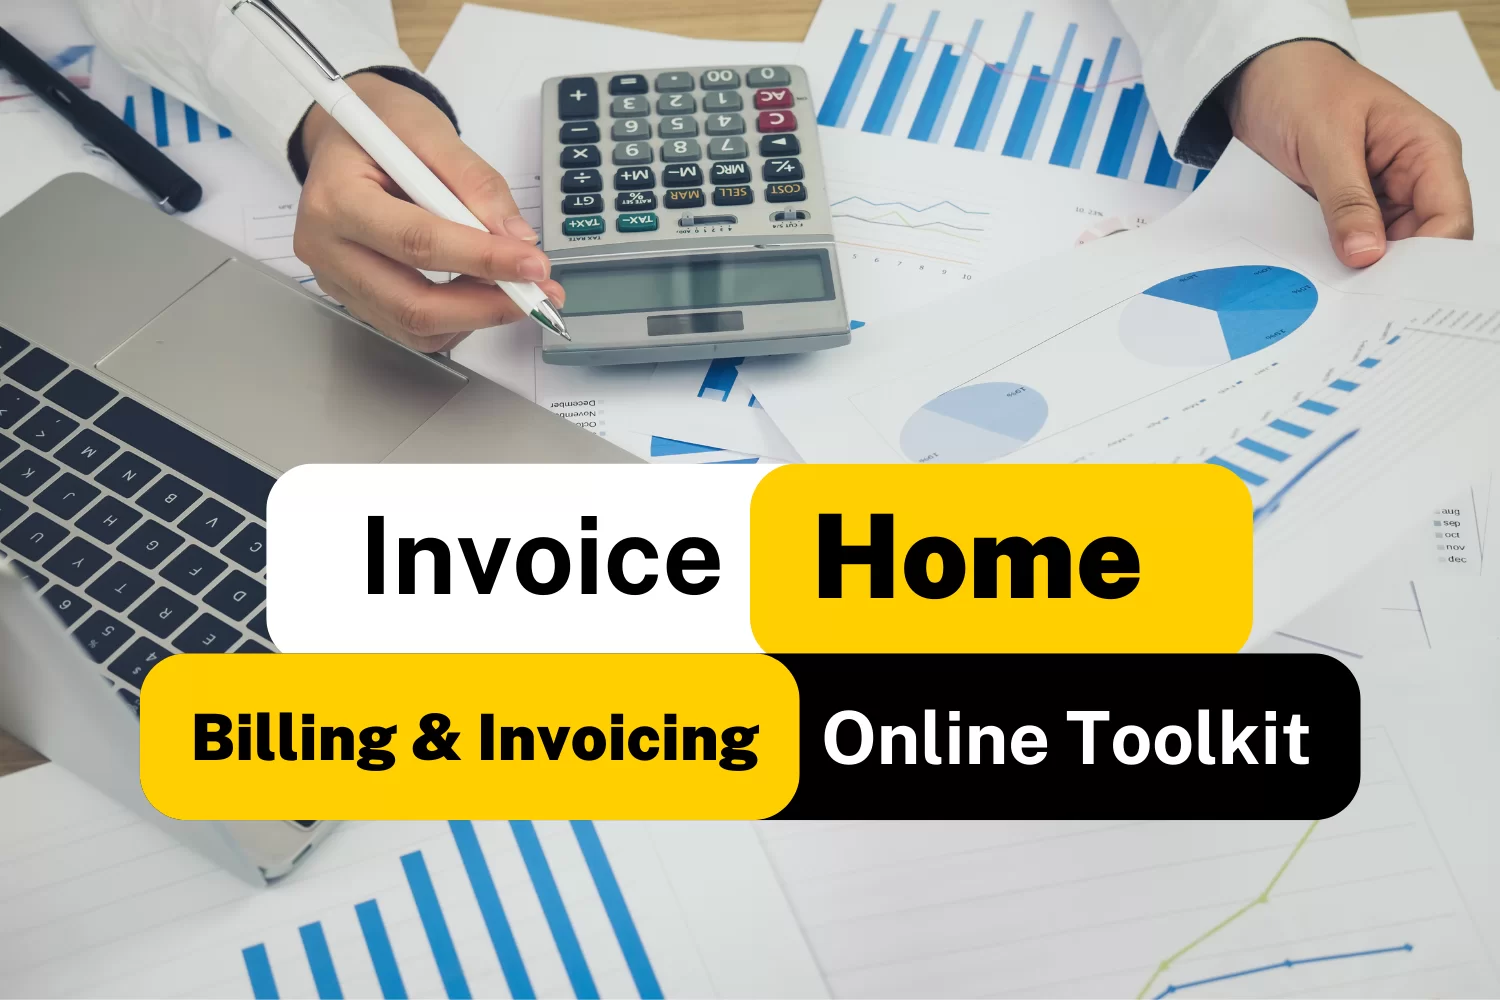 How Invoice Home Digital Online Billing Plus Invoicing Service Works